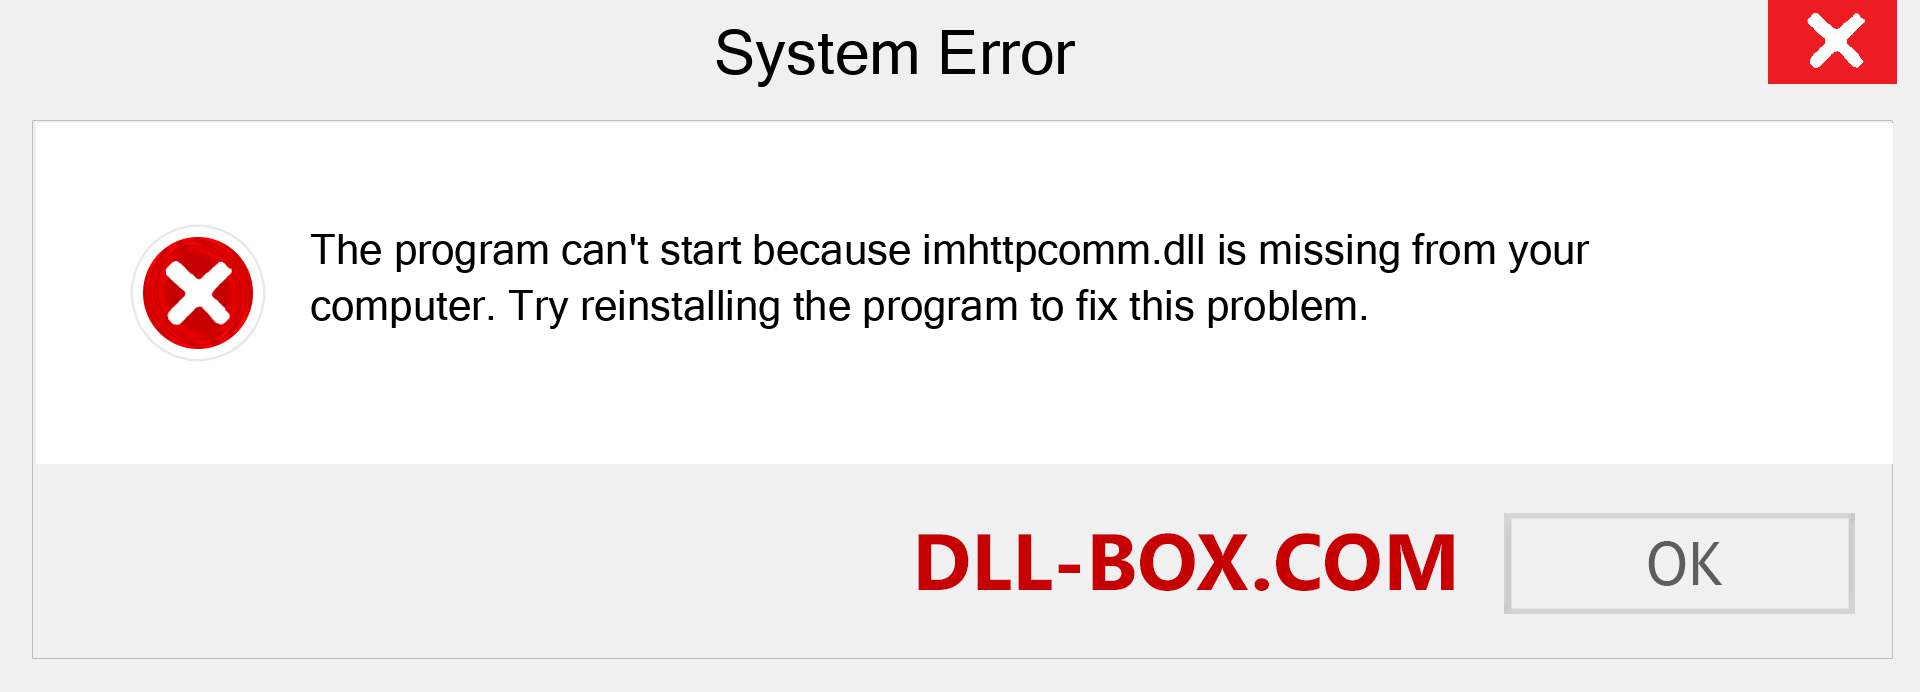  imhttpcomm.dll file is missing?. Download for Windows 7, 8, 10 - Fix  imhttpcomm dll Missing Error on Windows, photos, images